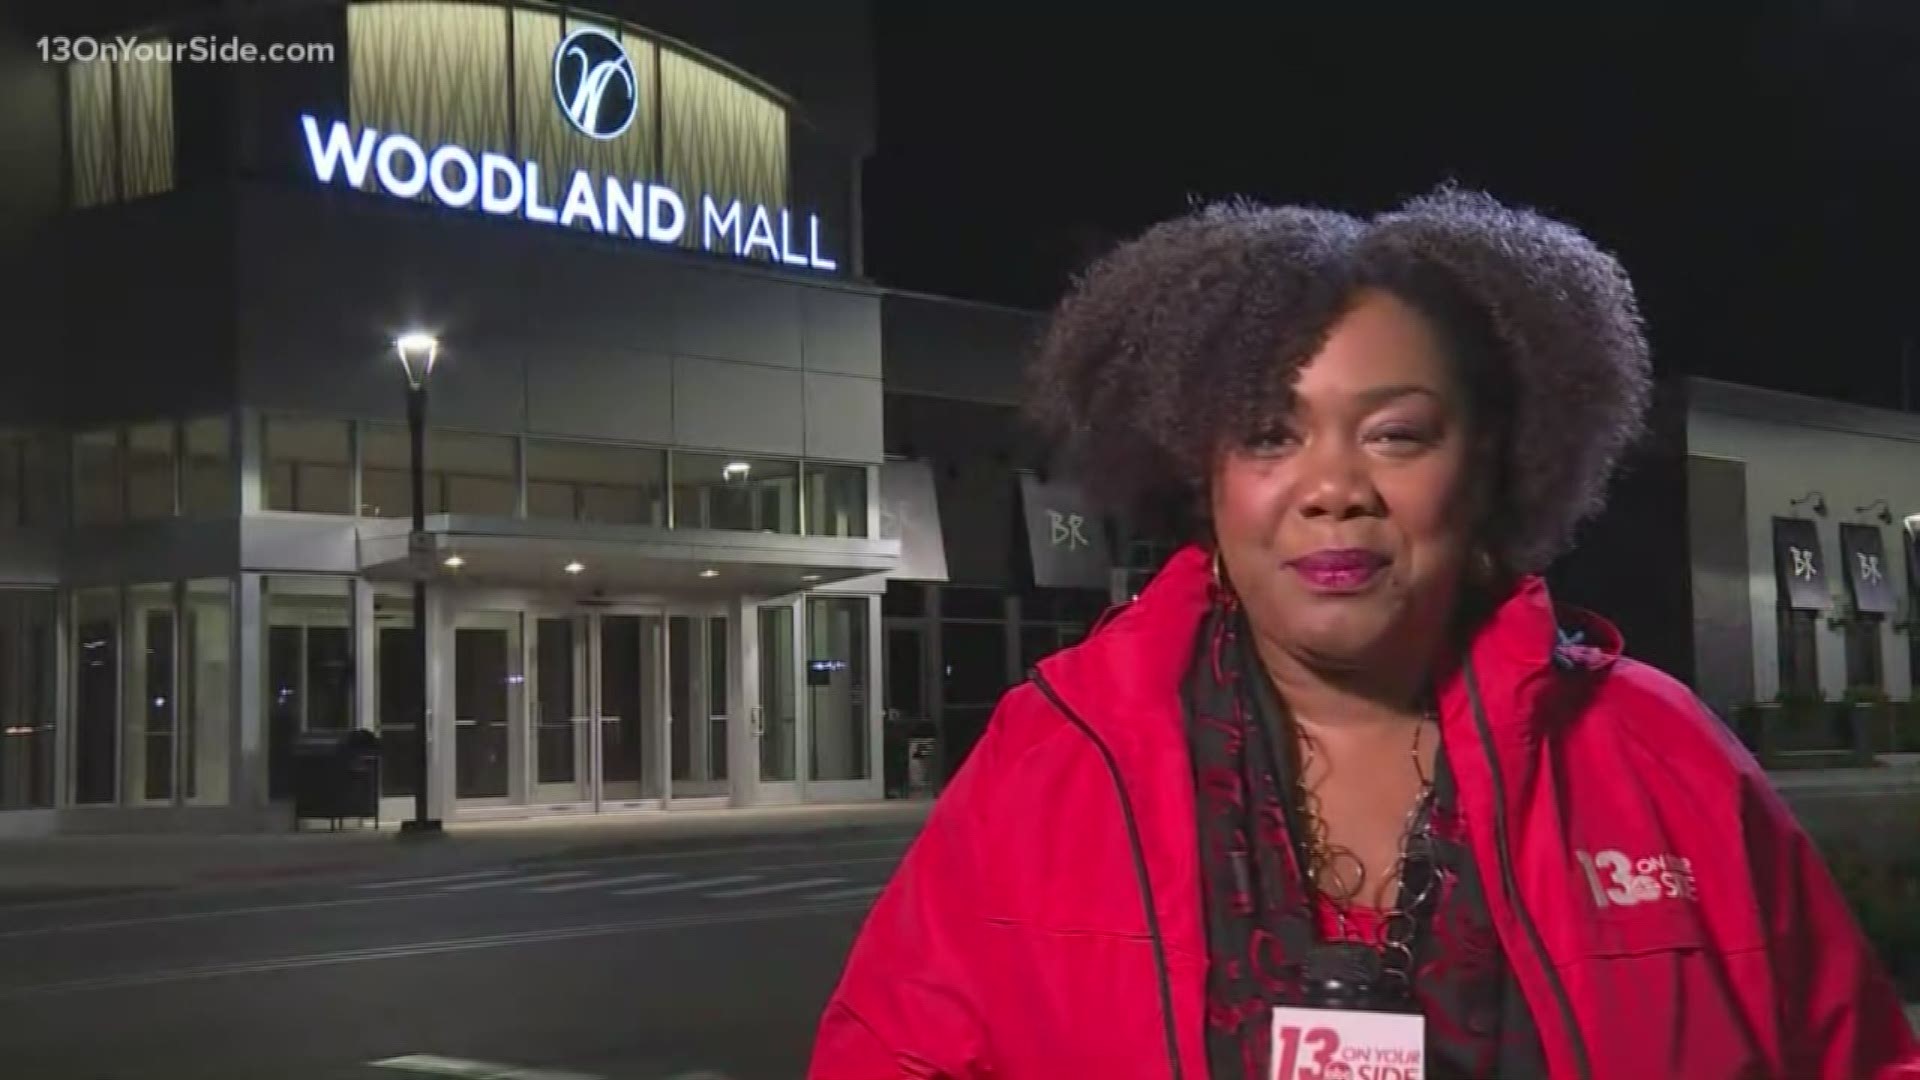 Woodland Mall is celebrating new stores opening this weekend.